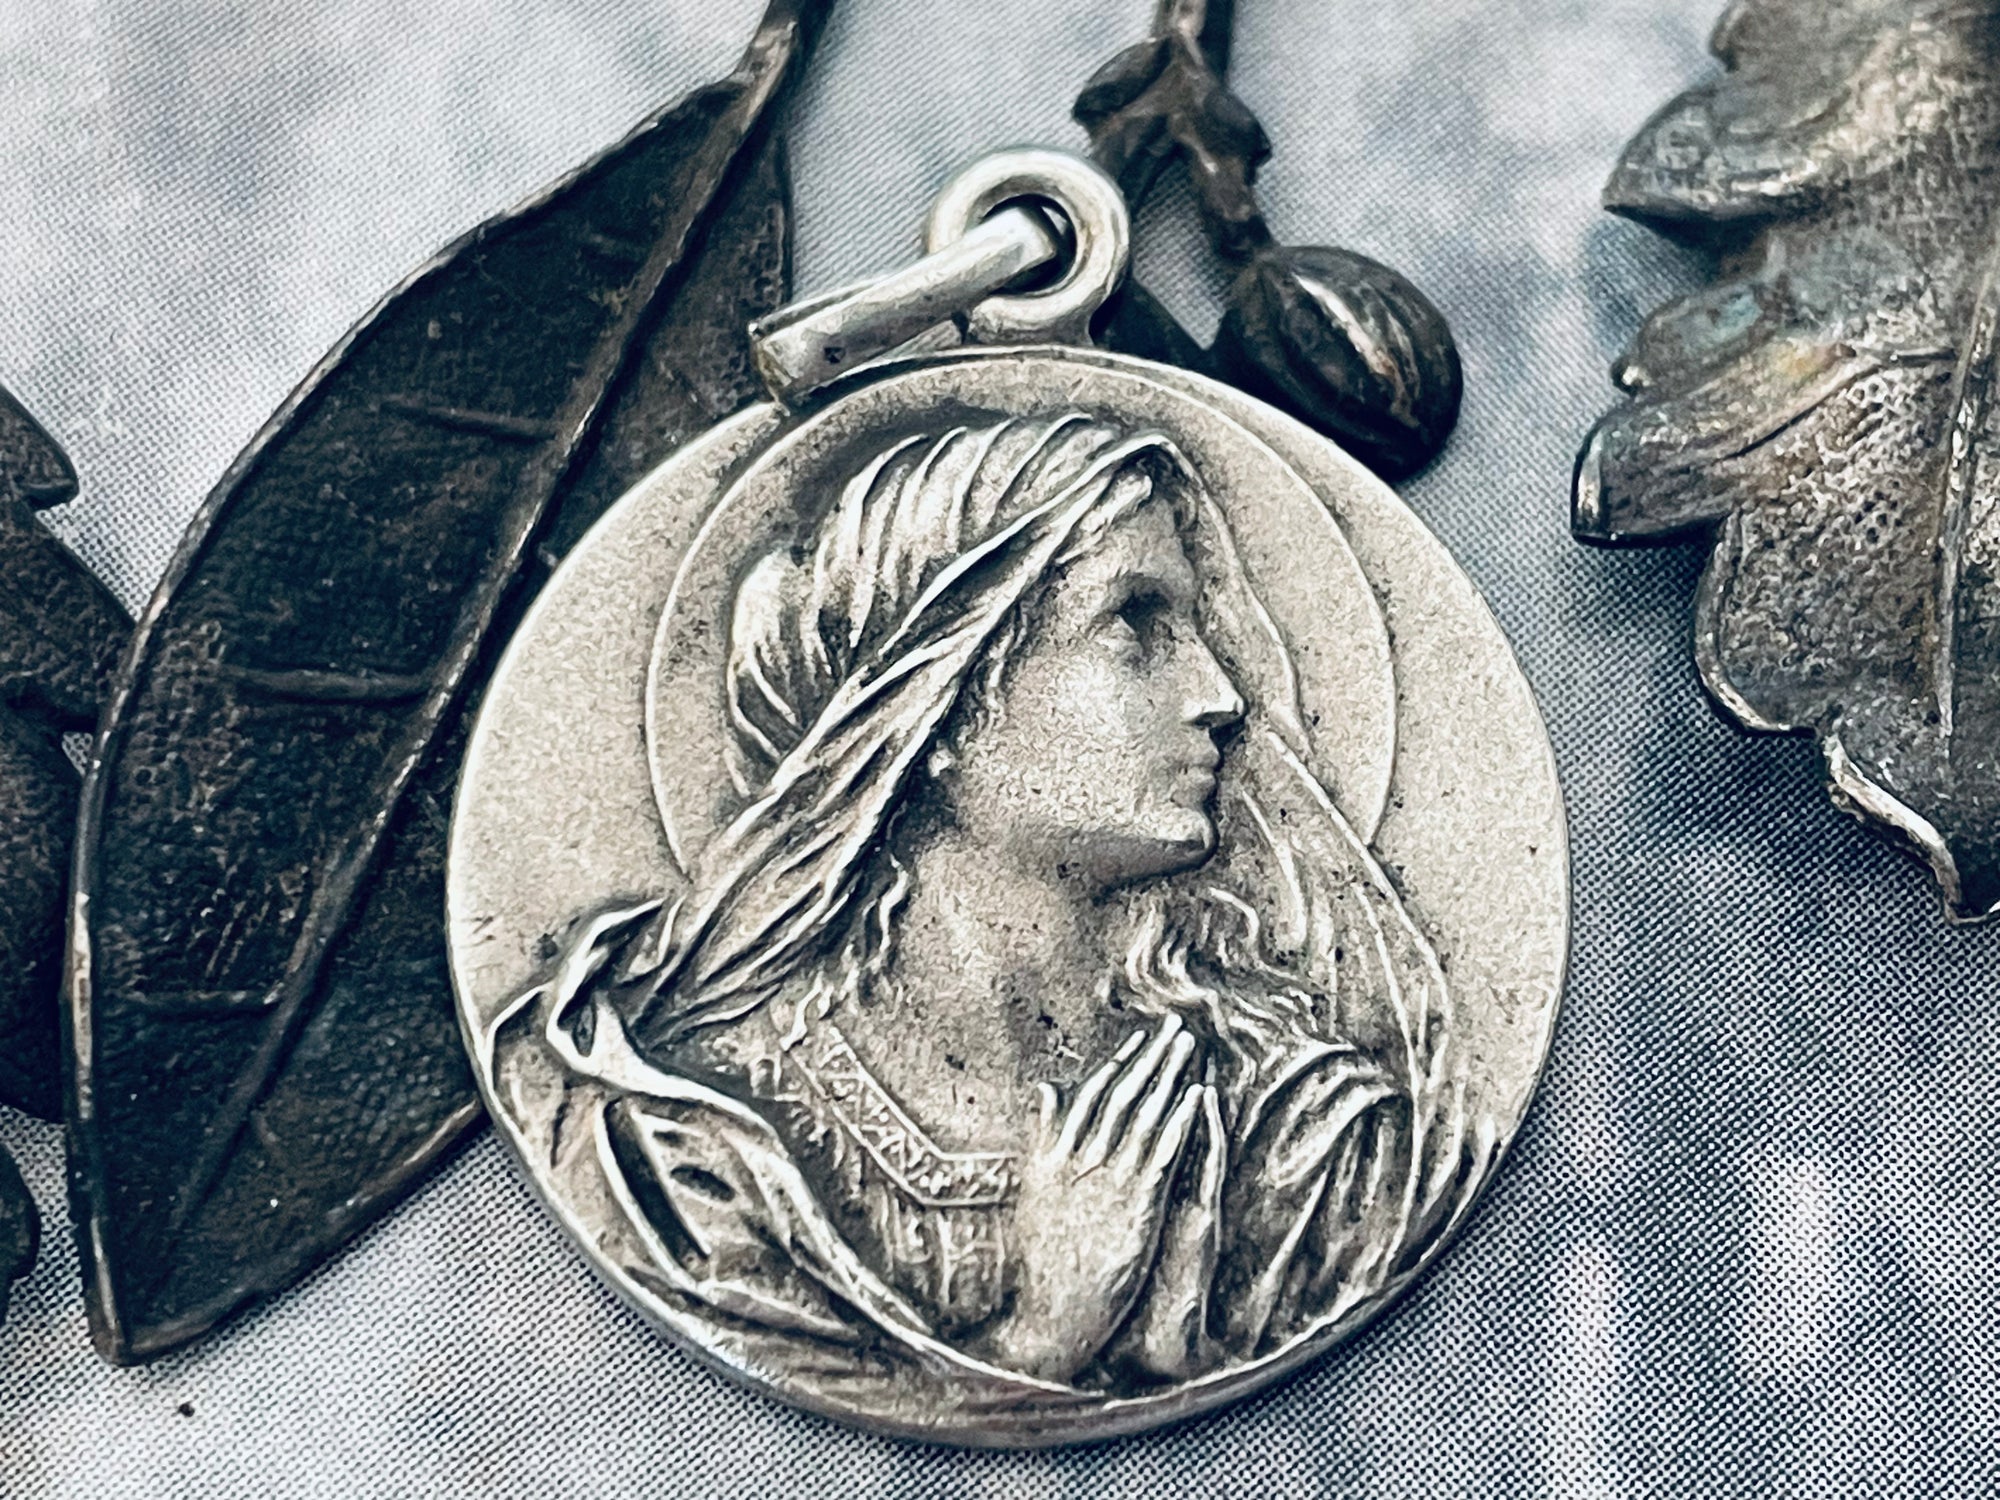 Vintage French Virgin Mary Medal